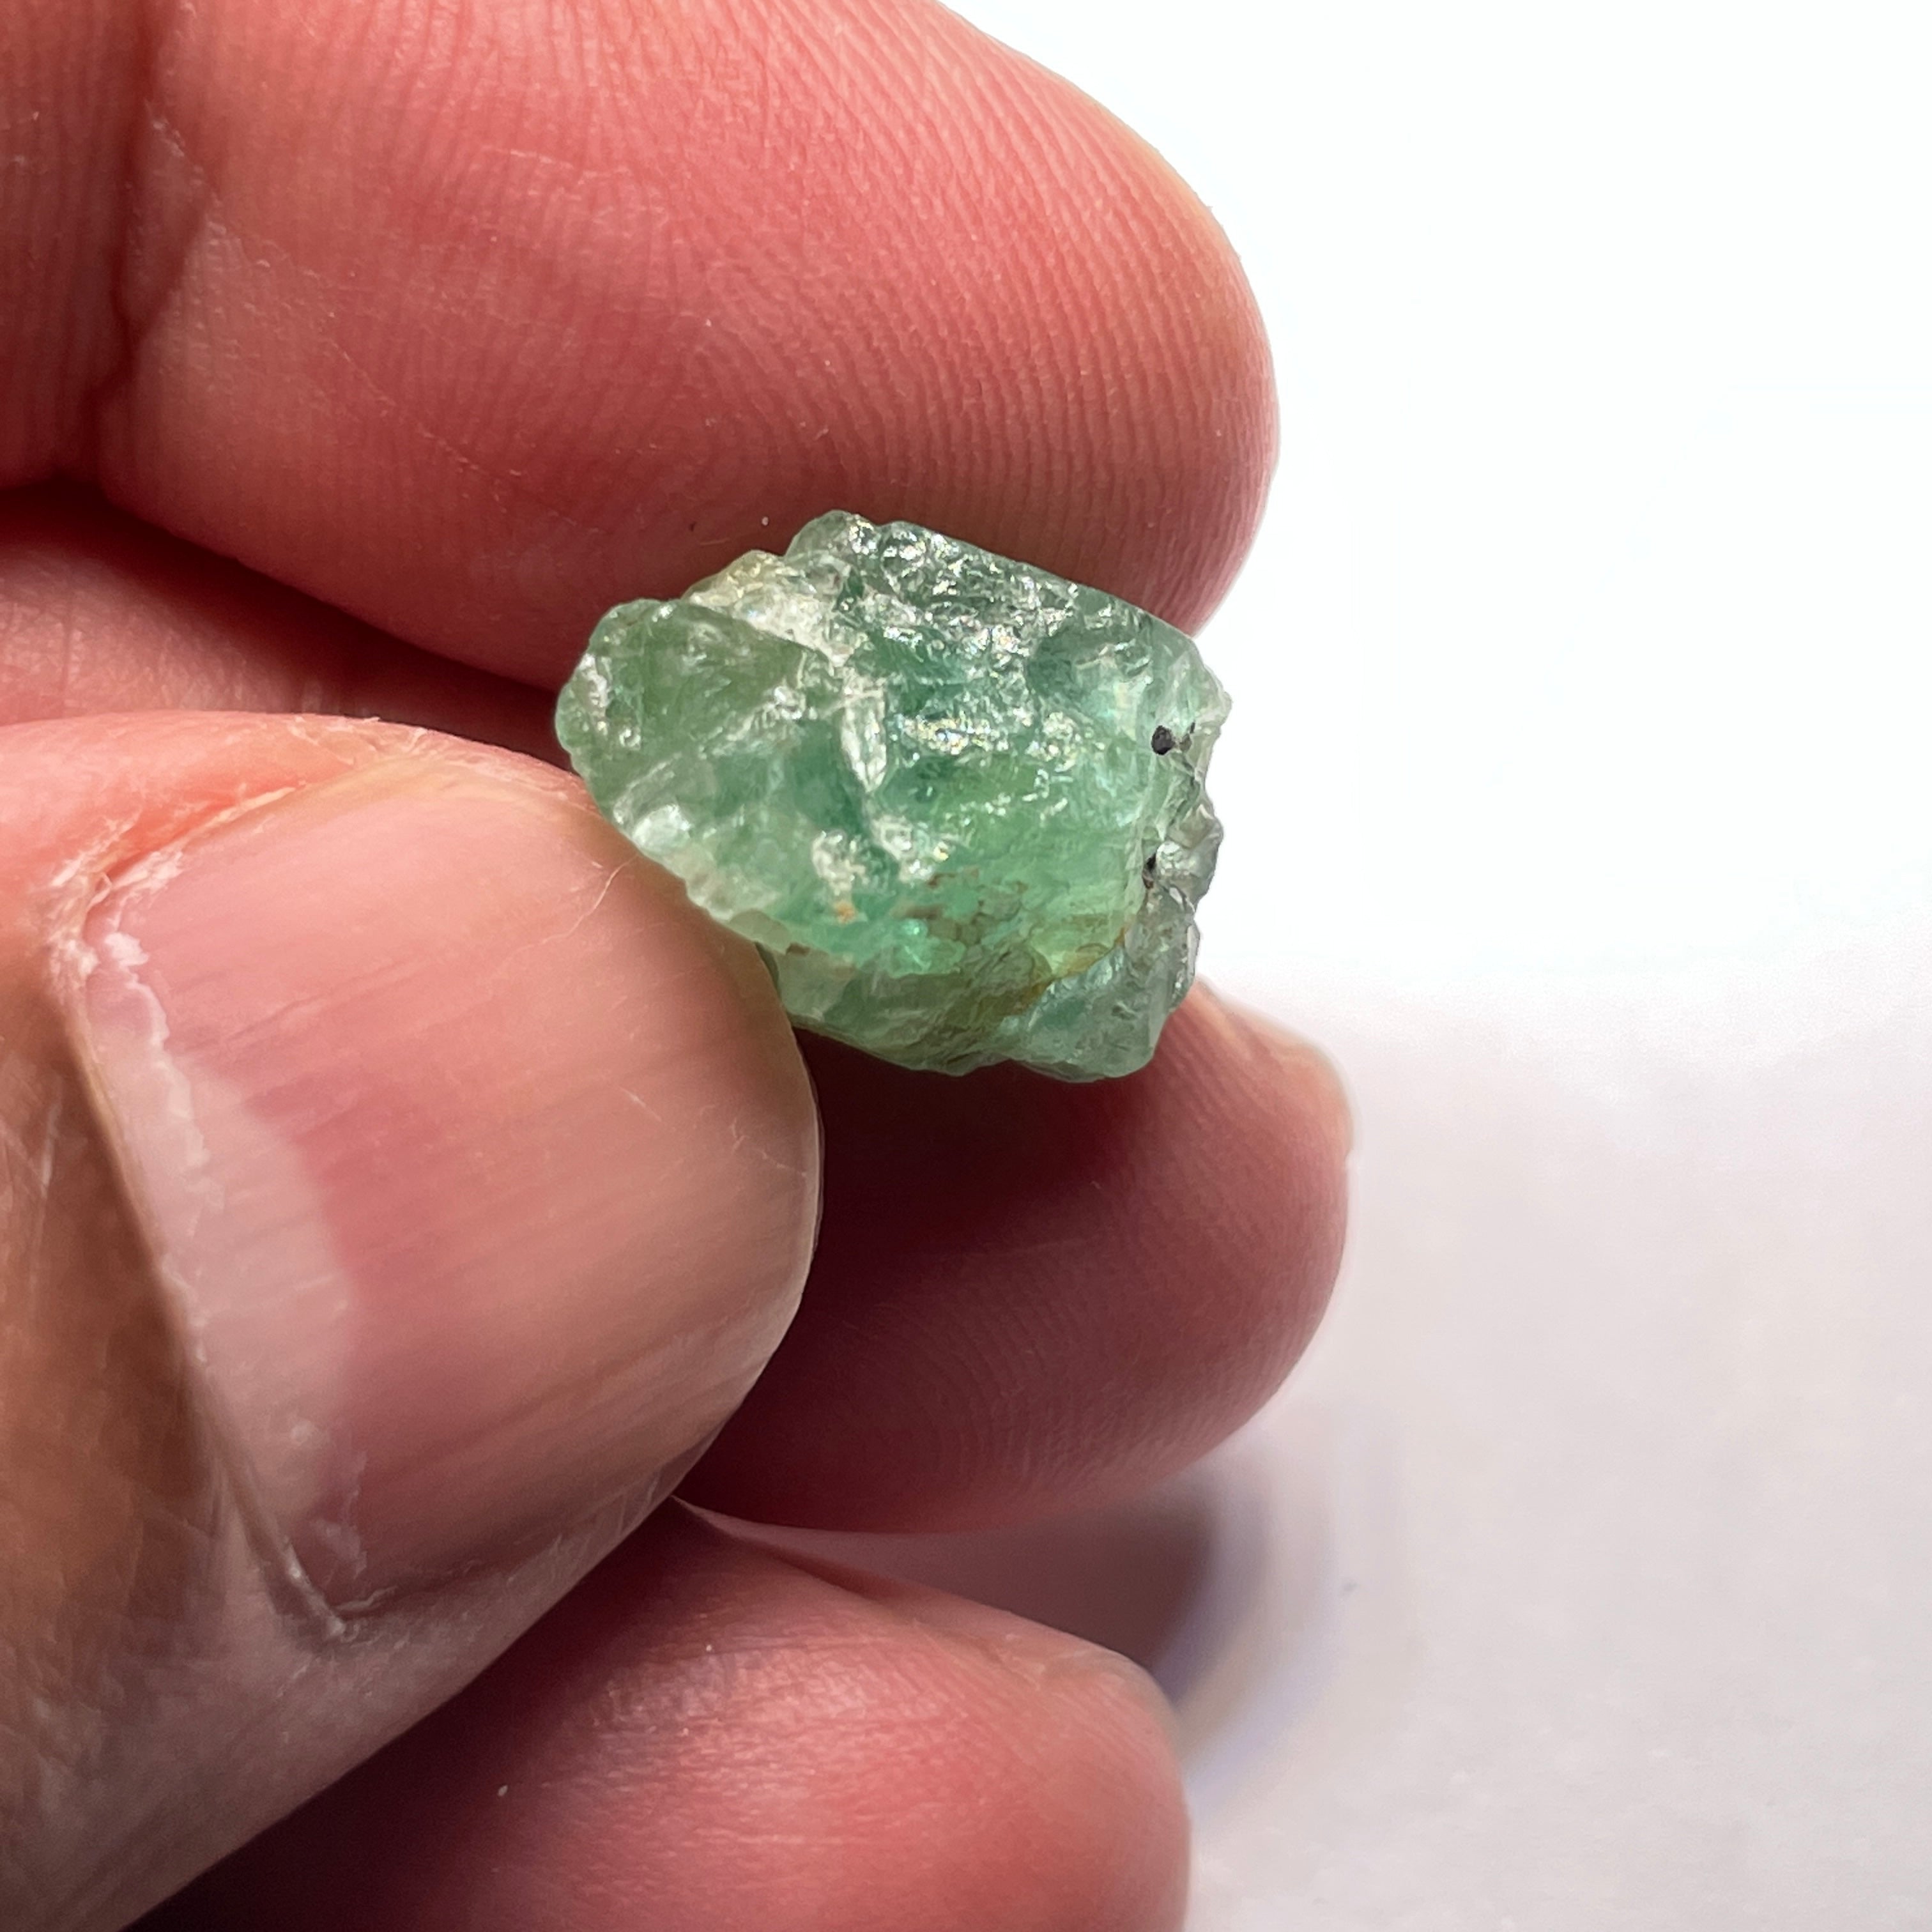 9.39Ct Emerald Crystal Tanzania Untreated Unheated No Oil With A Gem Portion For Faceting